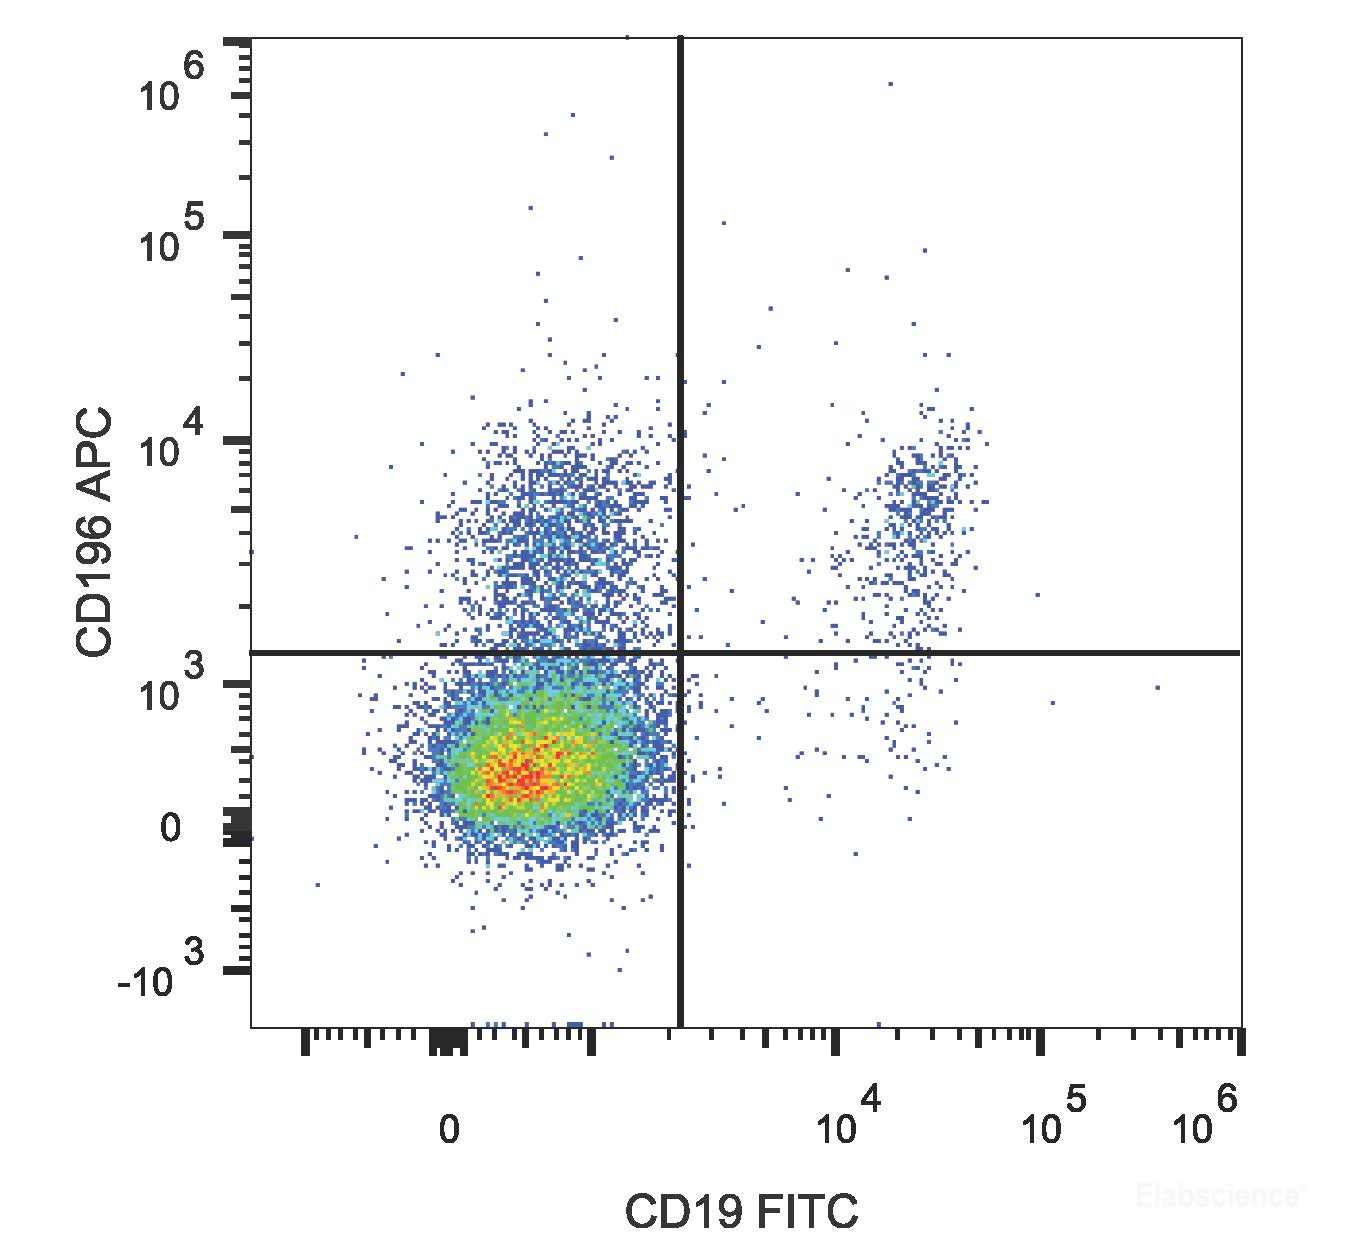 Human peripheral blood lymphocytes are stained with APC Anti-Human CD196/CCR6 Antibody and FITC Anti-Human CD19 Antibody.